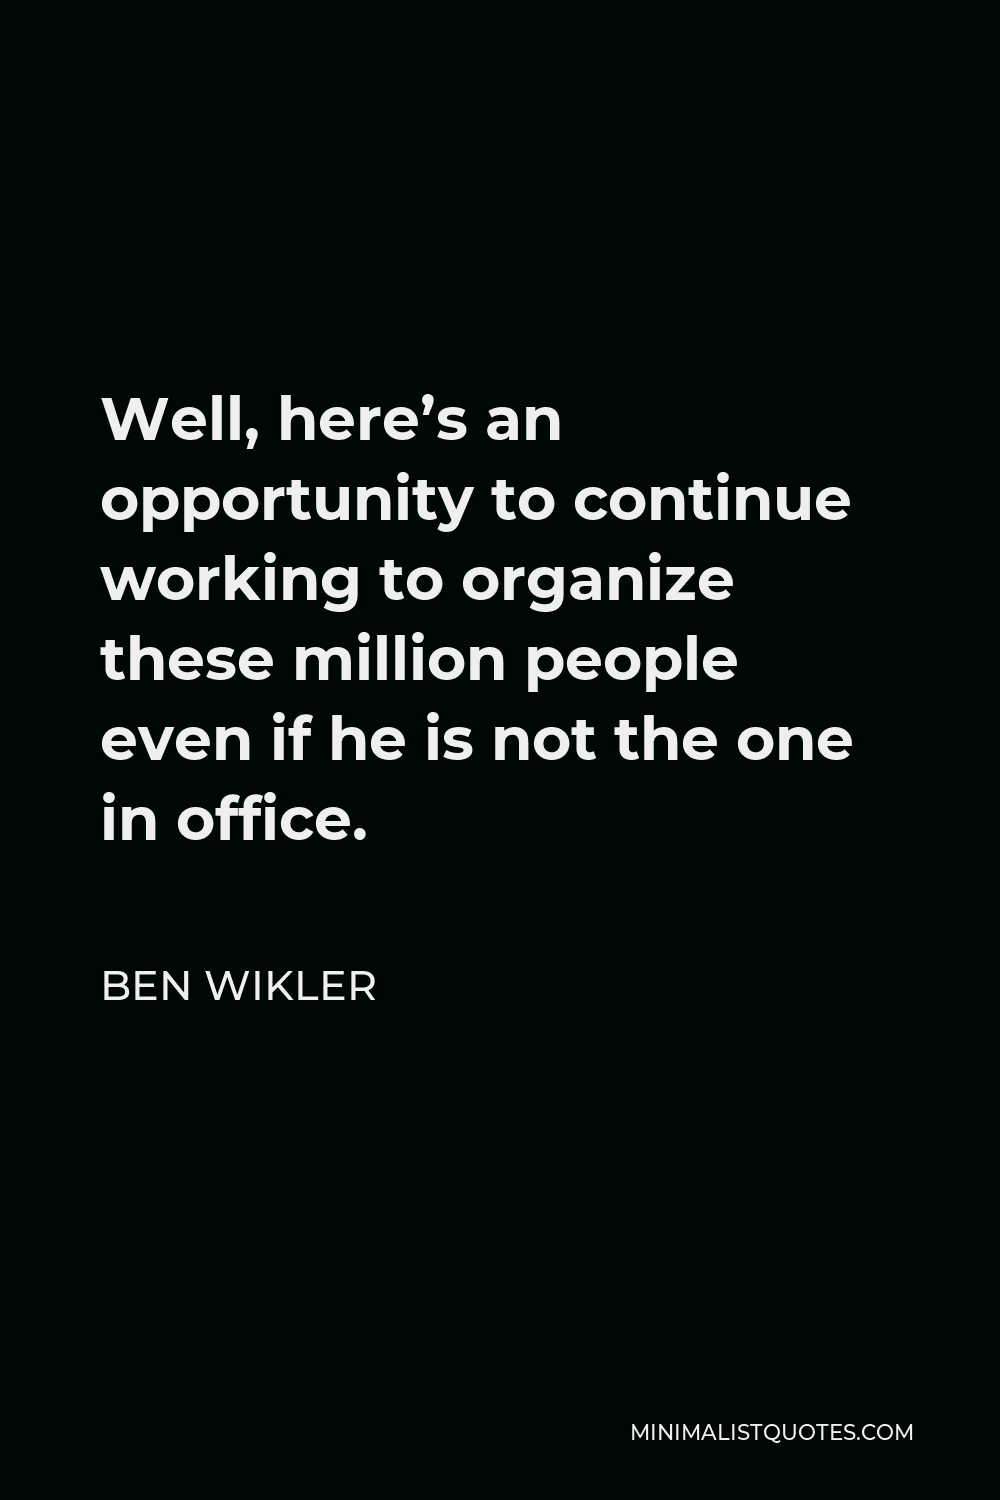 Ben Wikler Quote - Well, here’s an opportunity to continue working to organize these million people even if he is not the one in office.